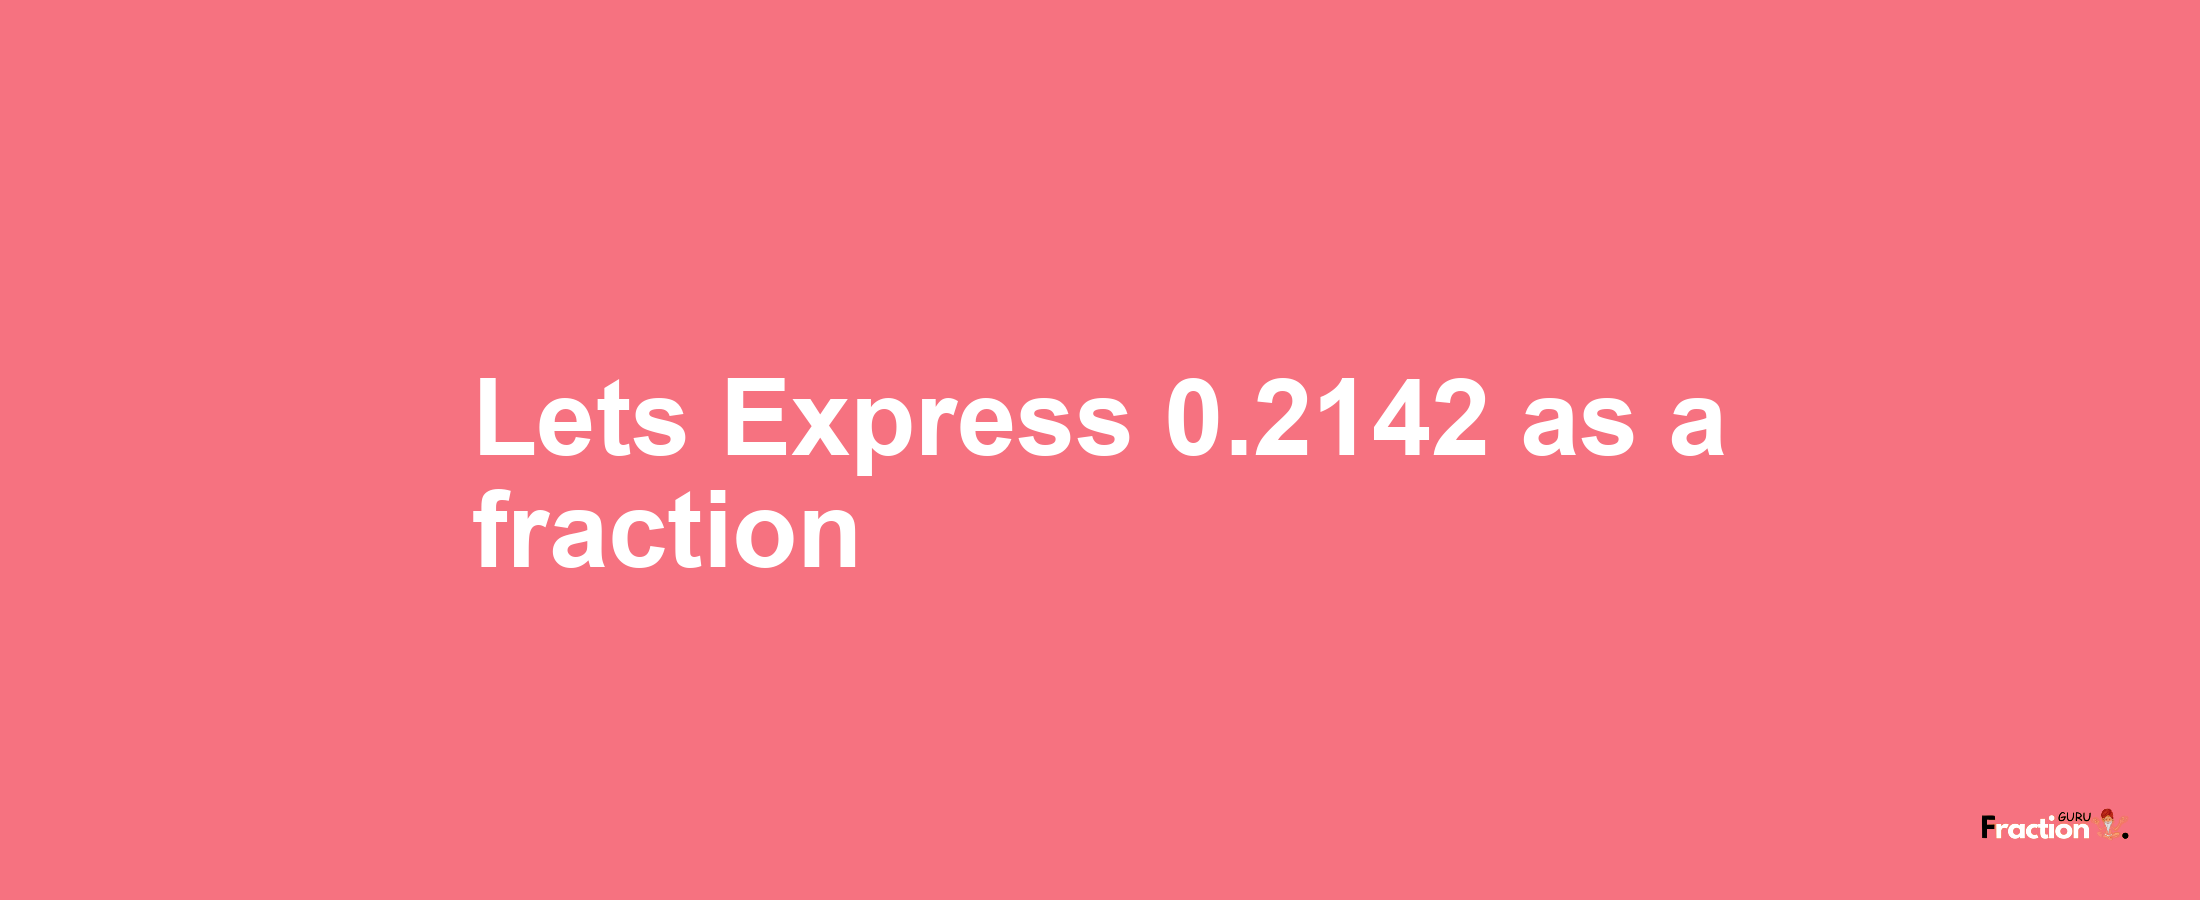 Lets Express 0.2142 as afraction